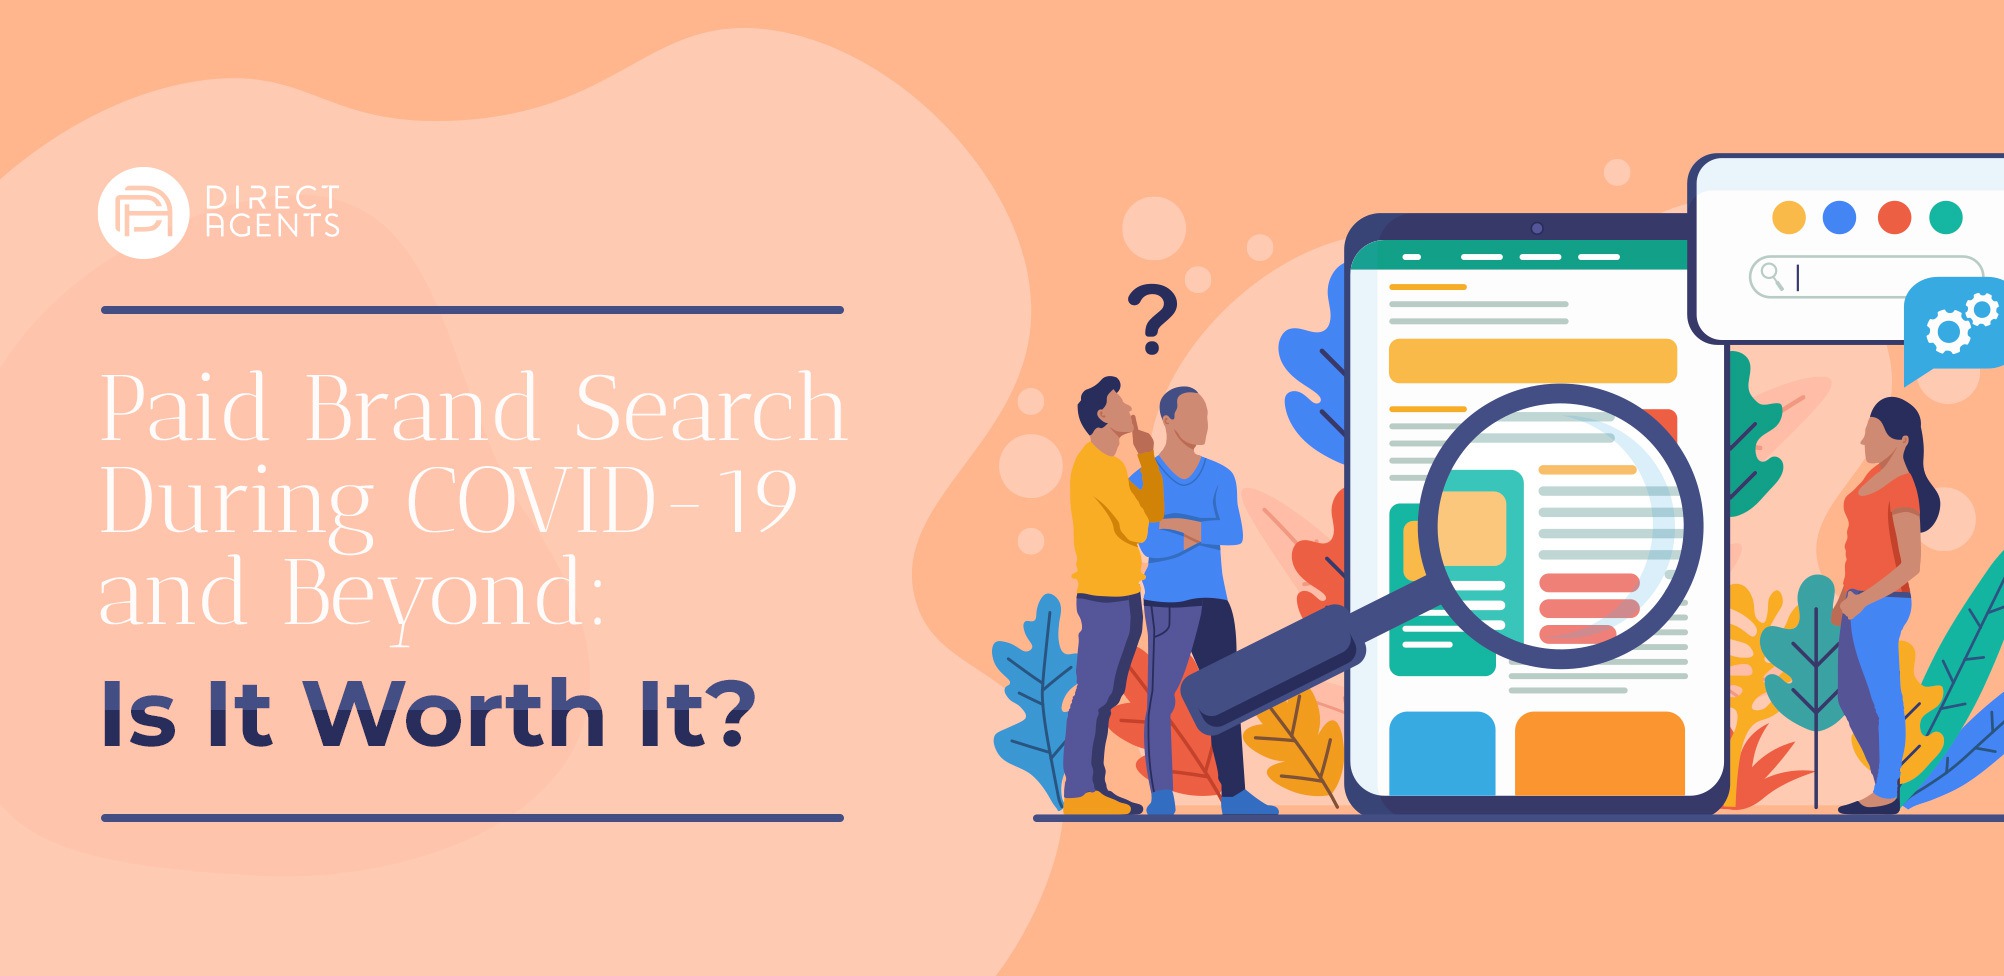 Paid Brand Search During COVID-19 and Beyond: Is It Worth It?